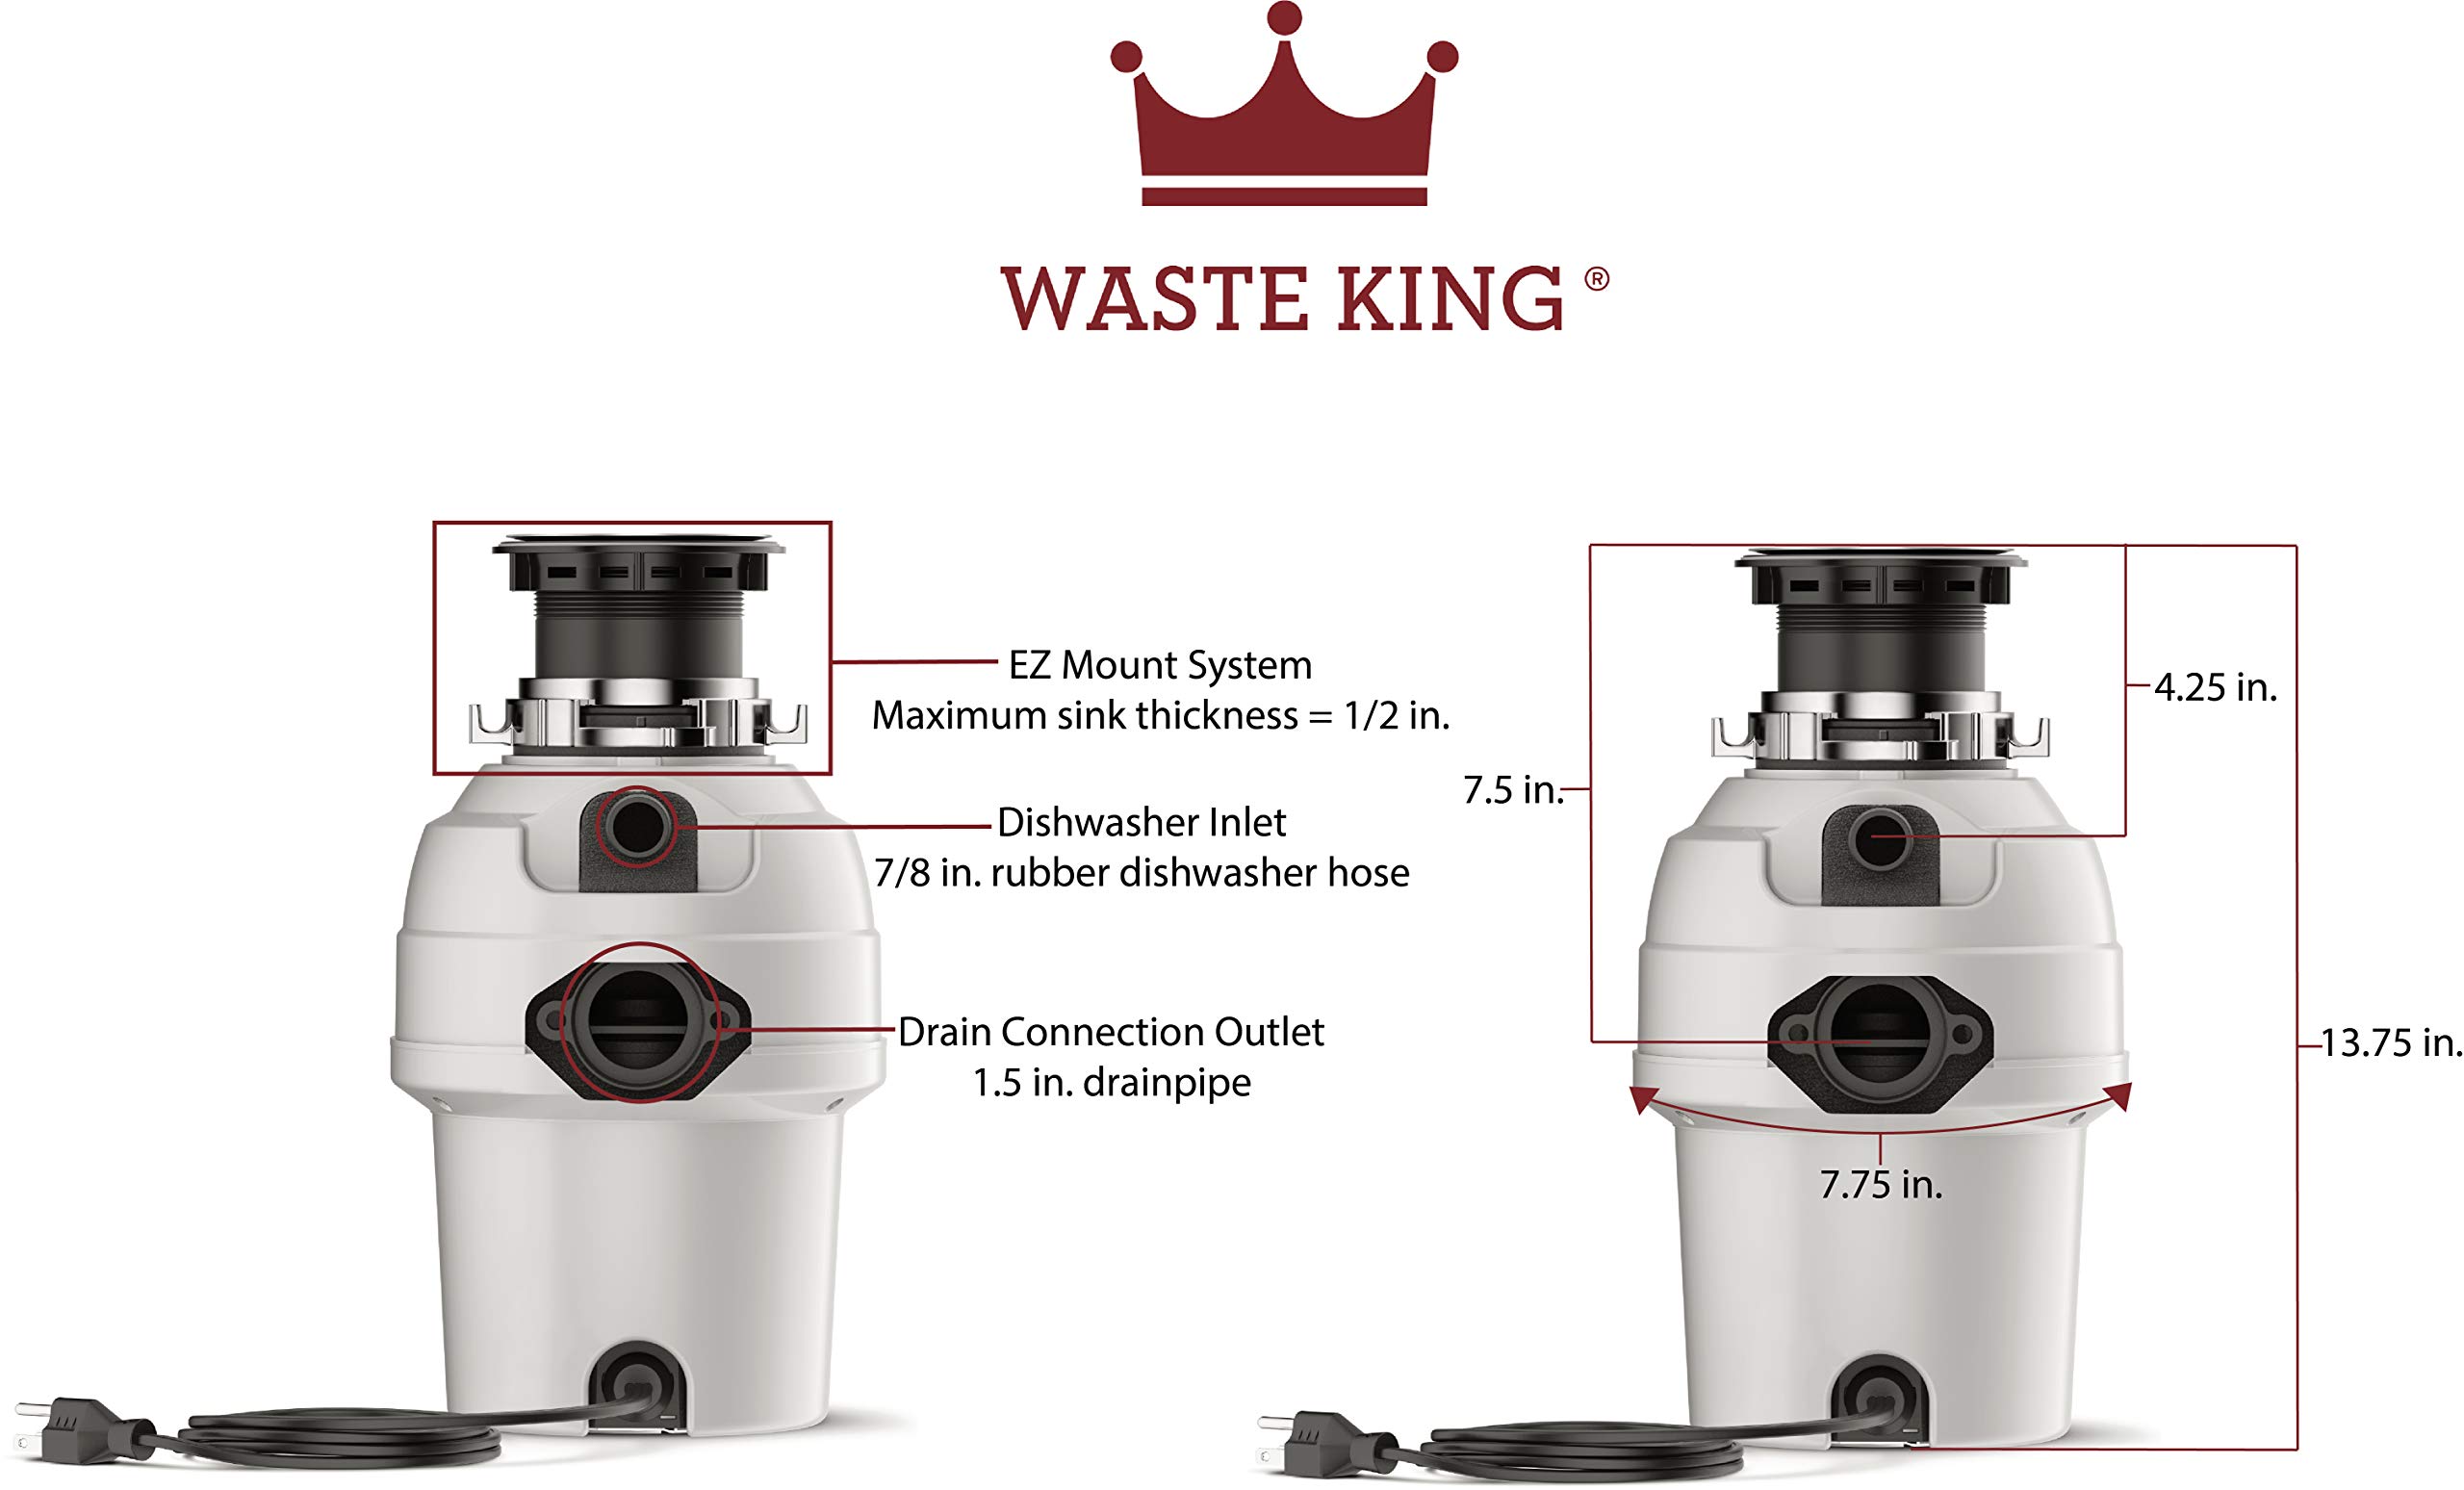 Waste King 3/4 HP Garbage Disposal with Power Cord, Food Waste Disposer for Kitchen Sink, L-3200